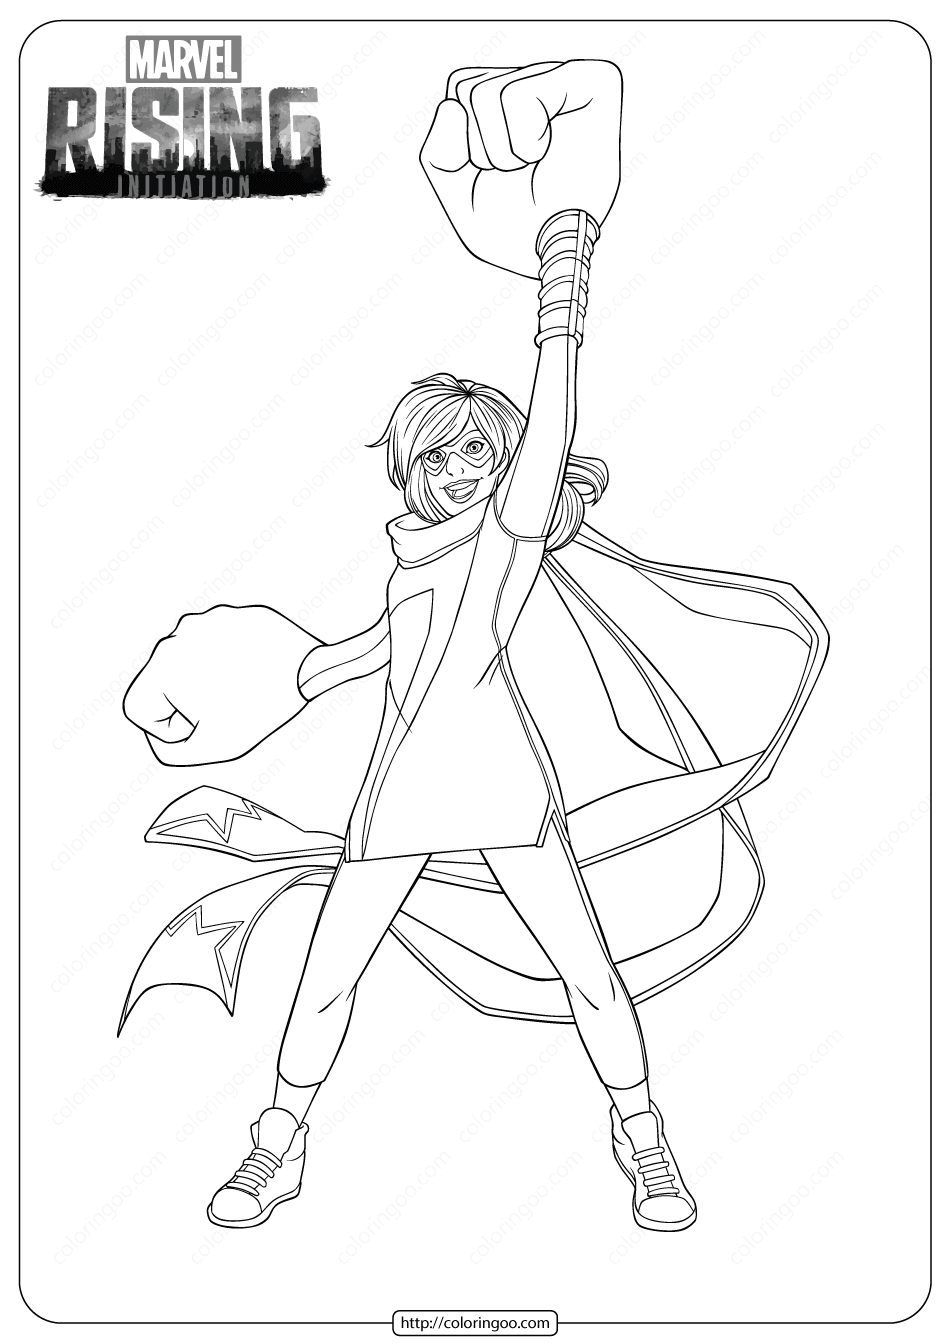 marvel rising ms marvel coloring pages